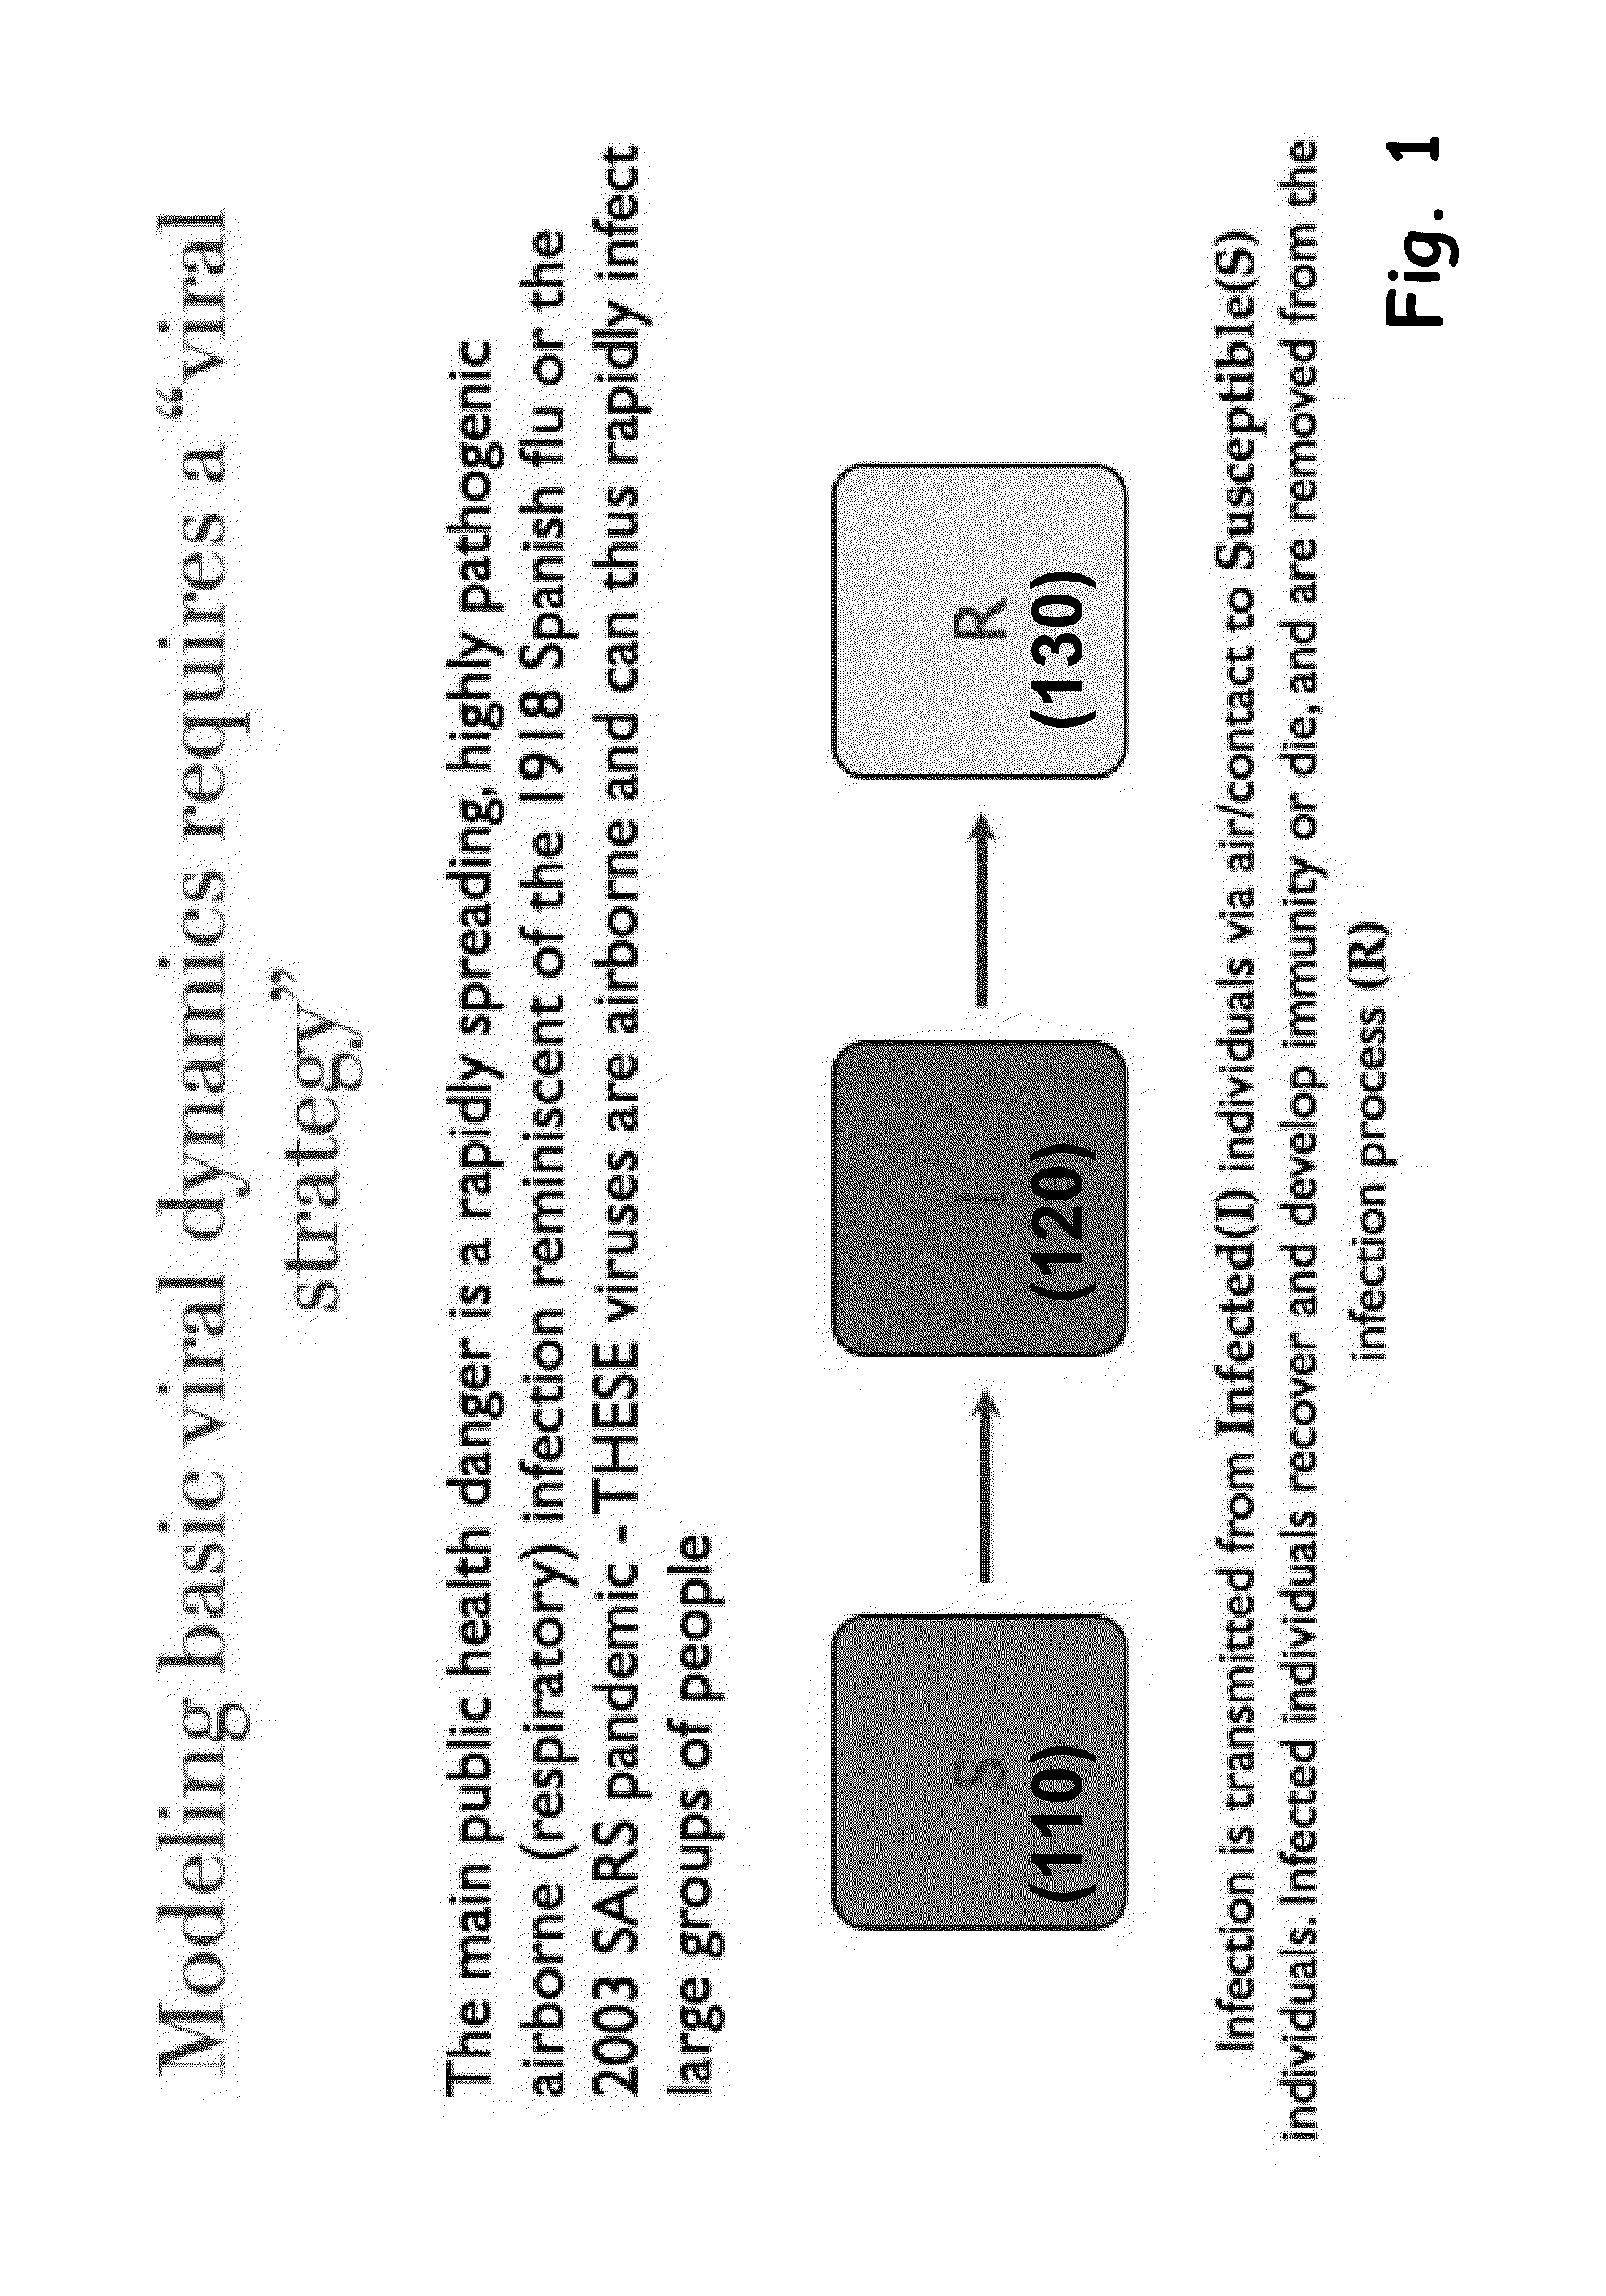 System and method to enable detection of viral infection by users of electronic communication devices